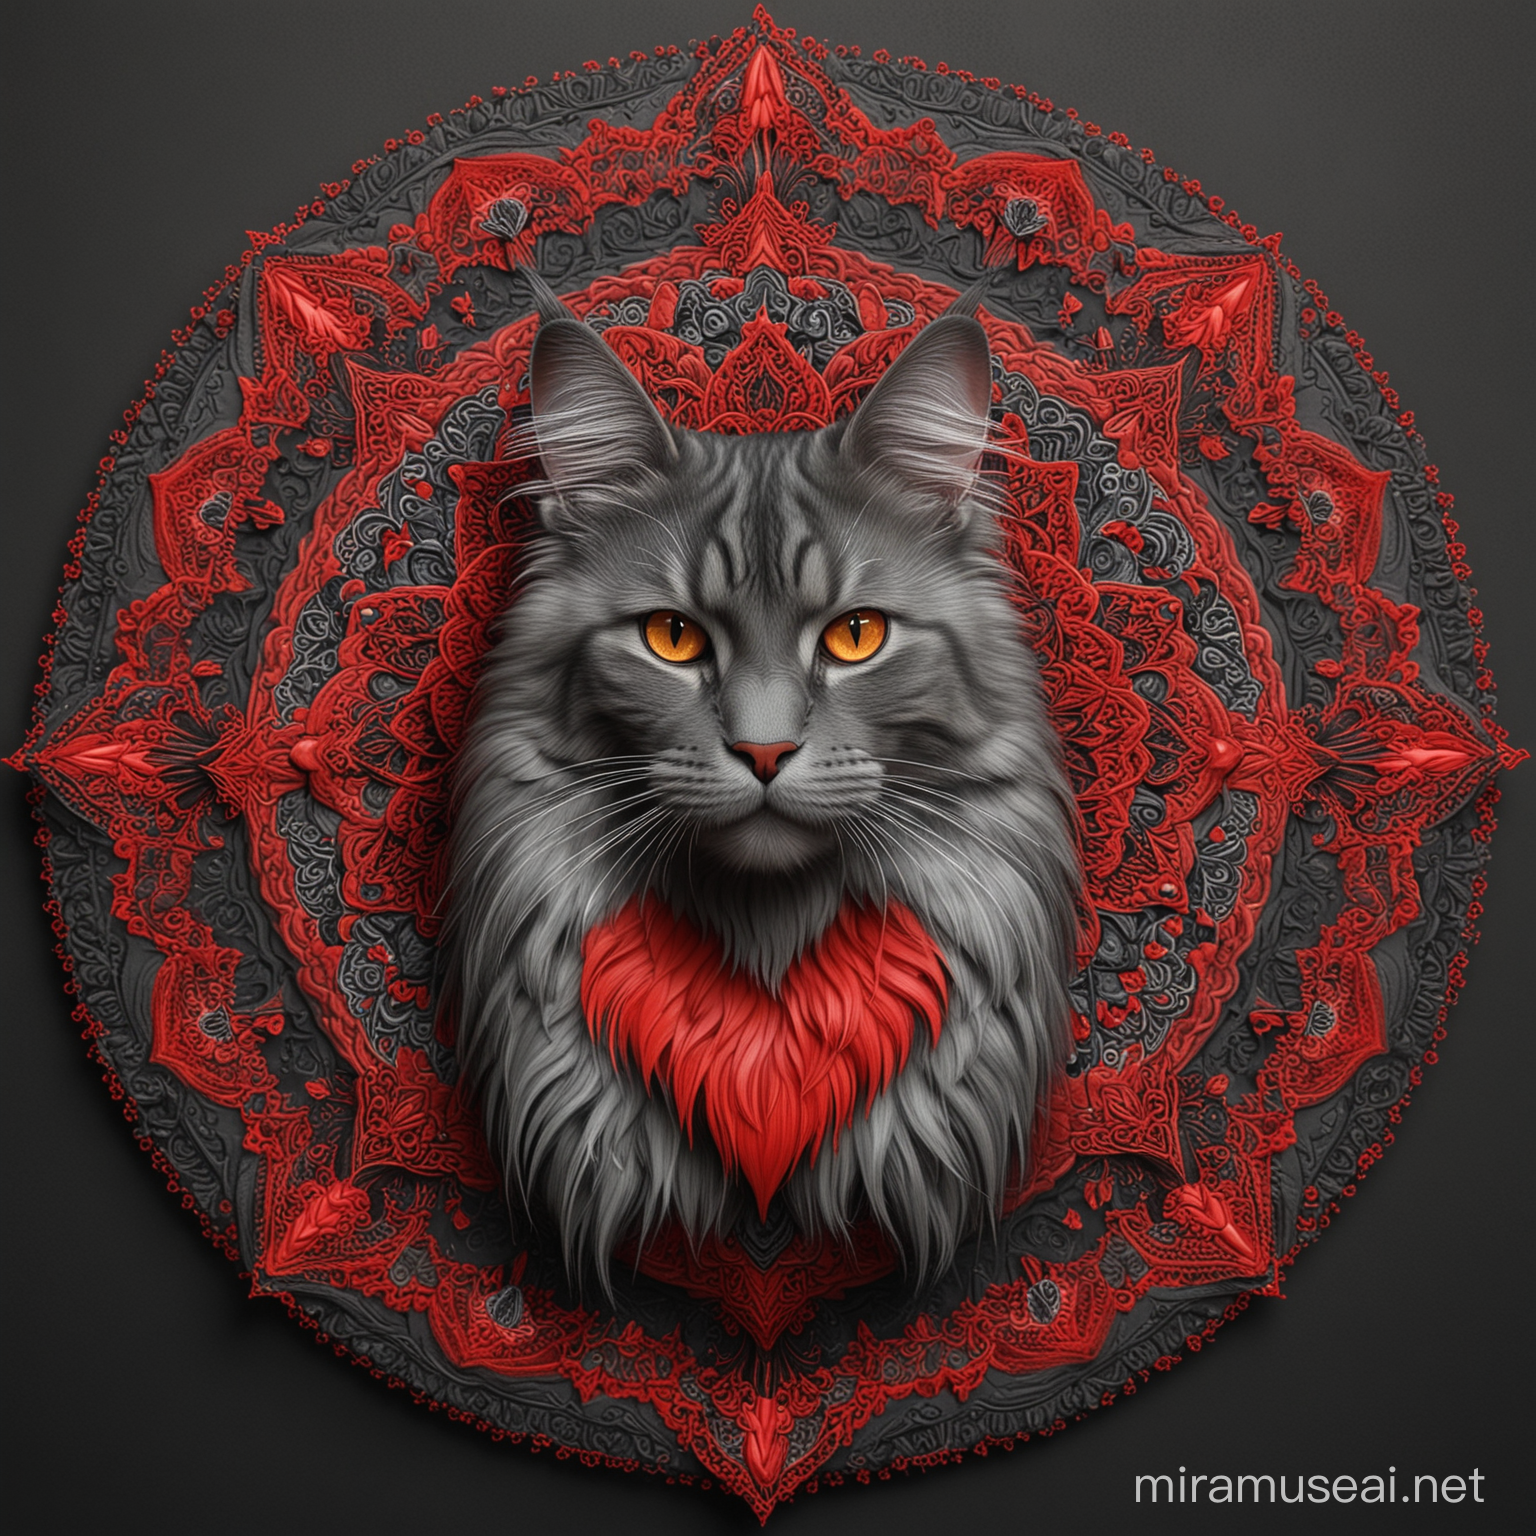 Majestic Grey Maine Coon Cat in Vibrant Red and Black Mandala